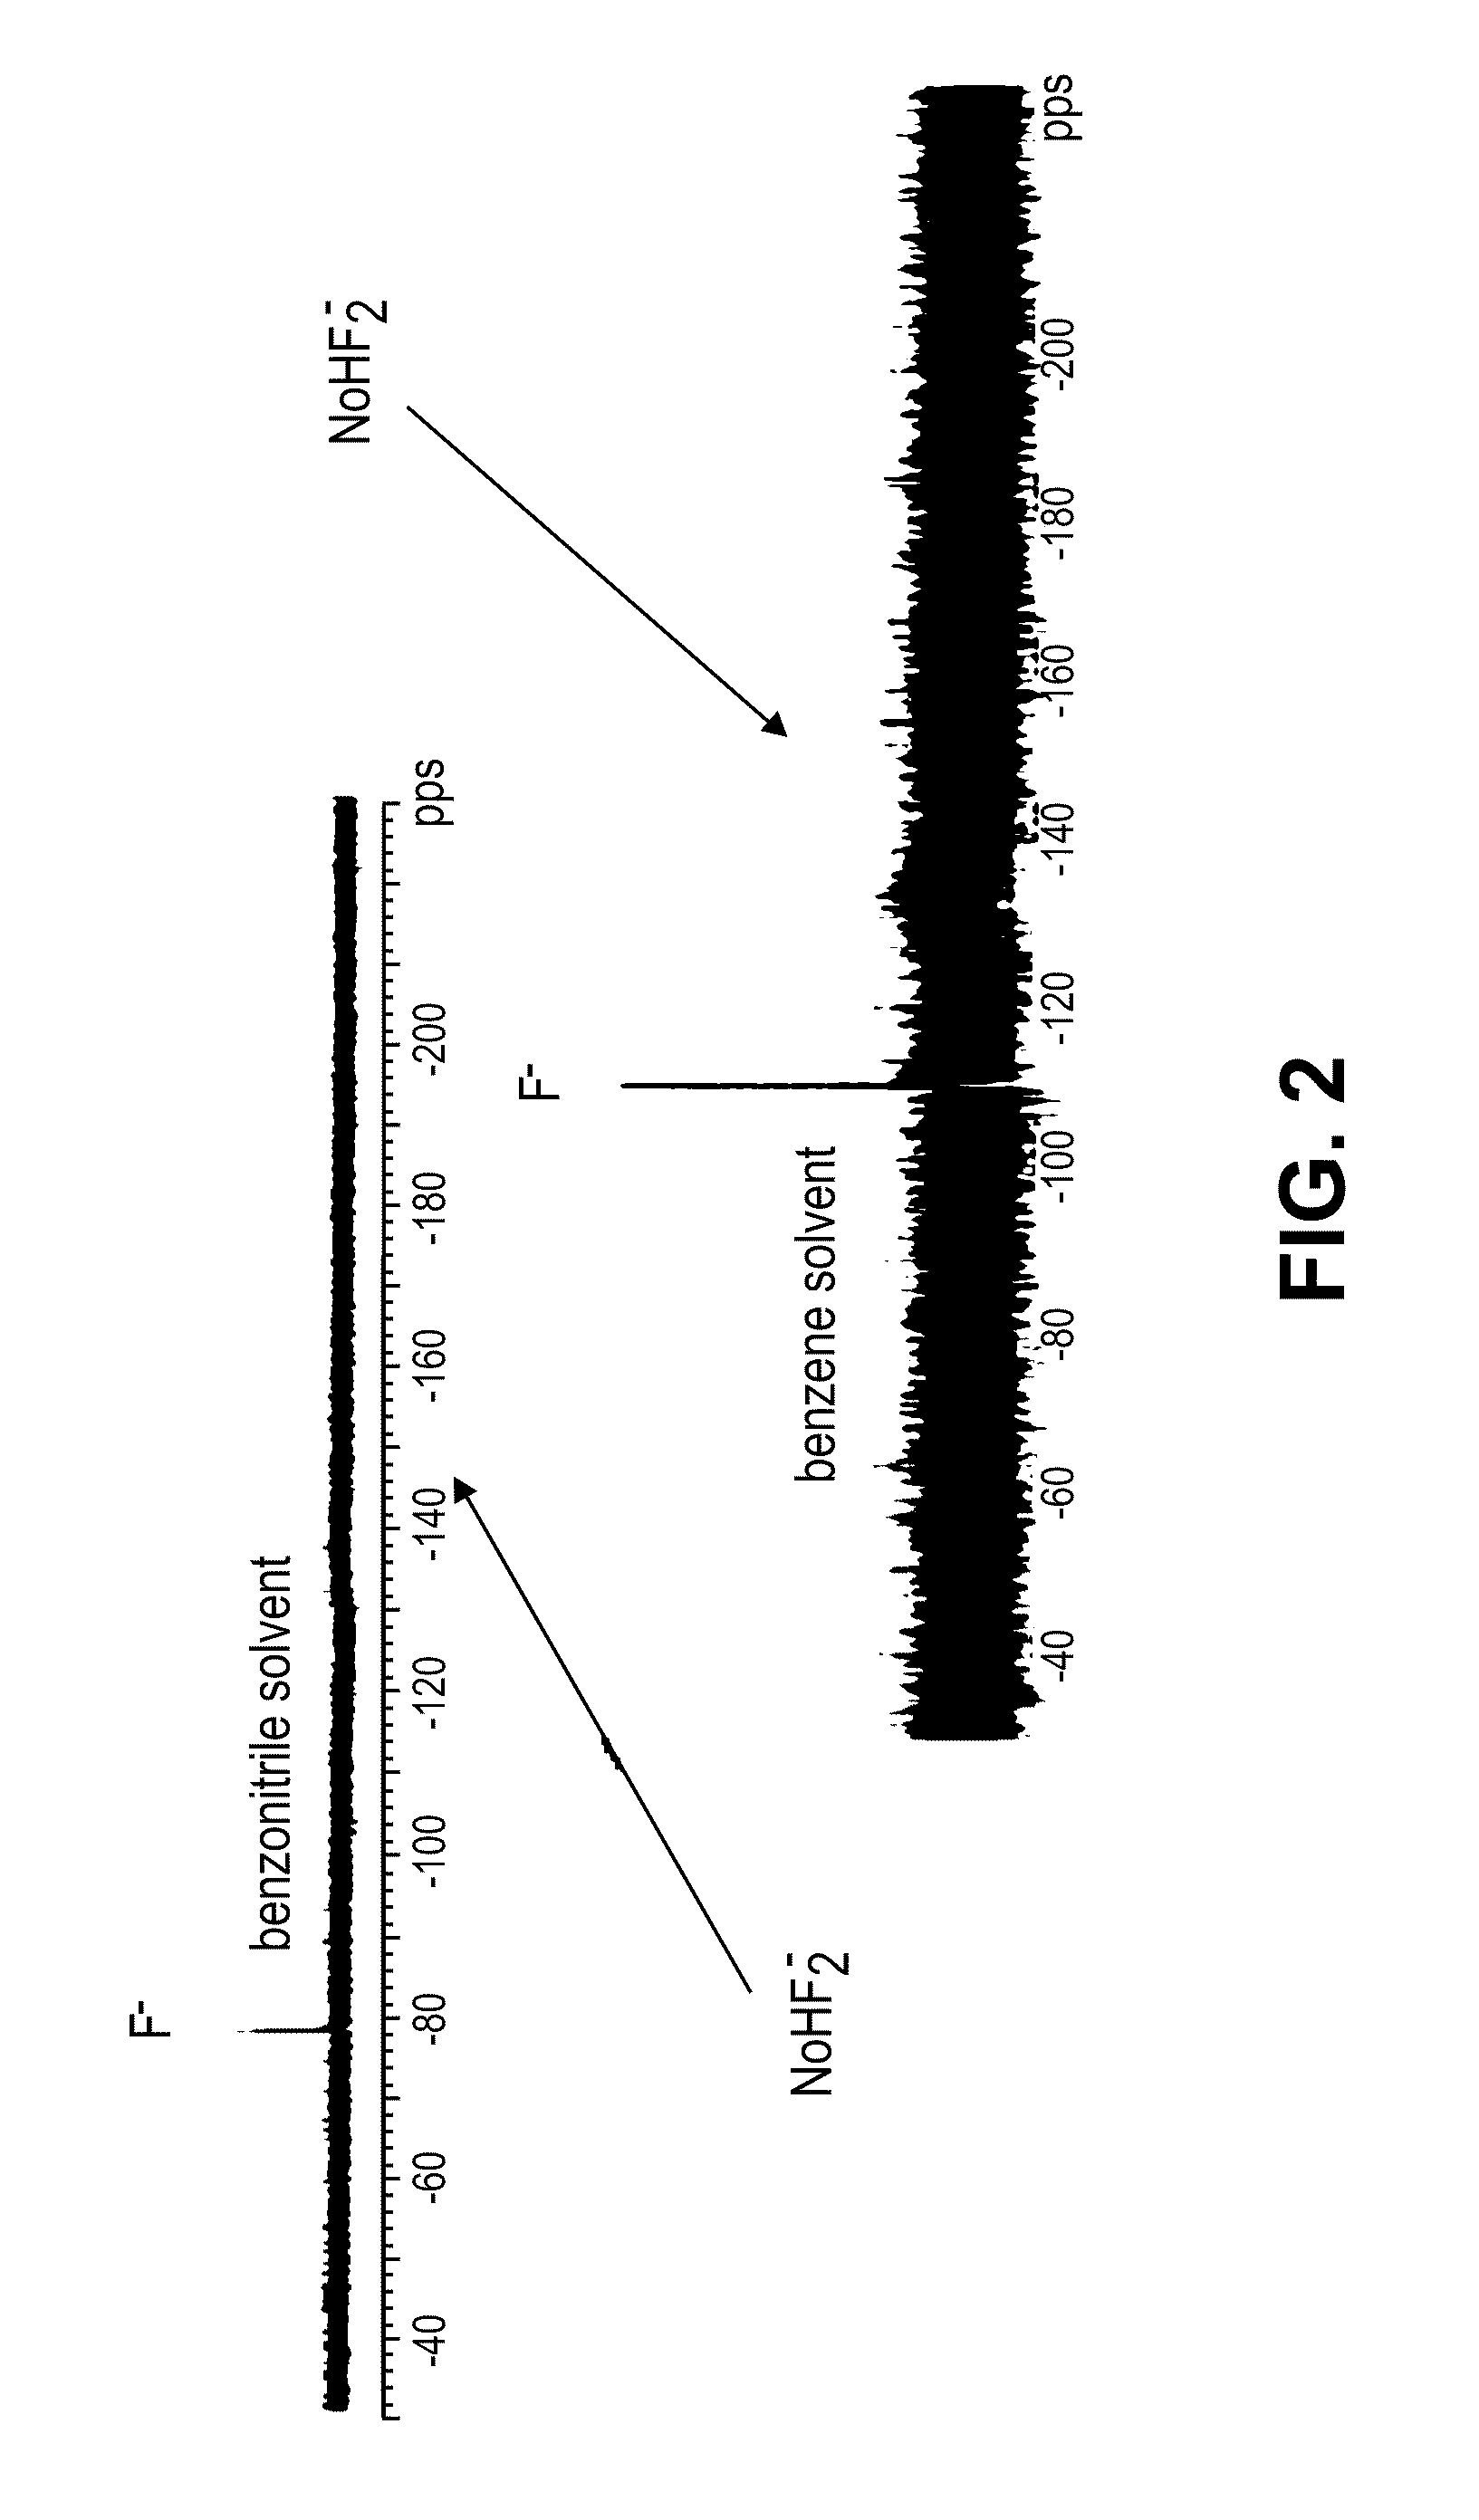 Fluoride ion battery electrolyte compositions